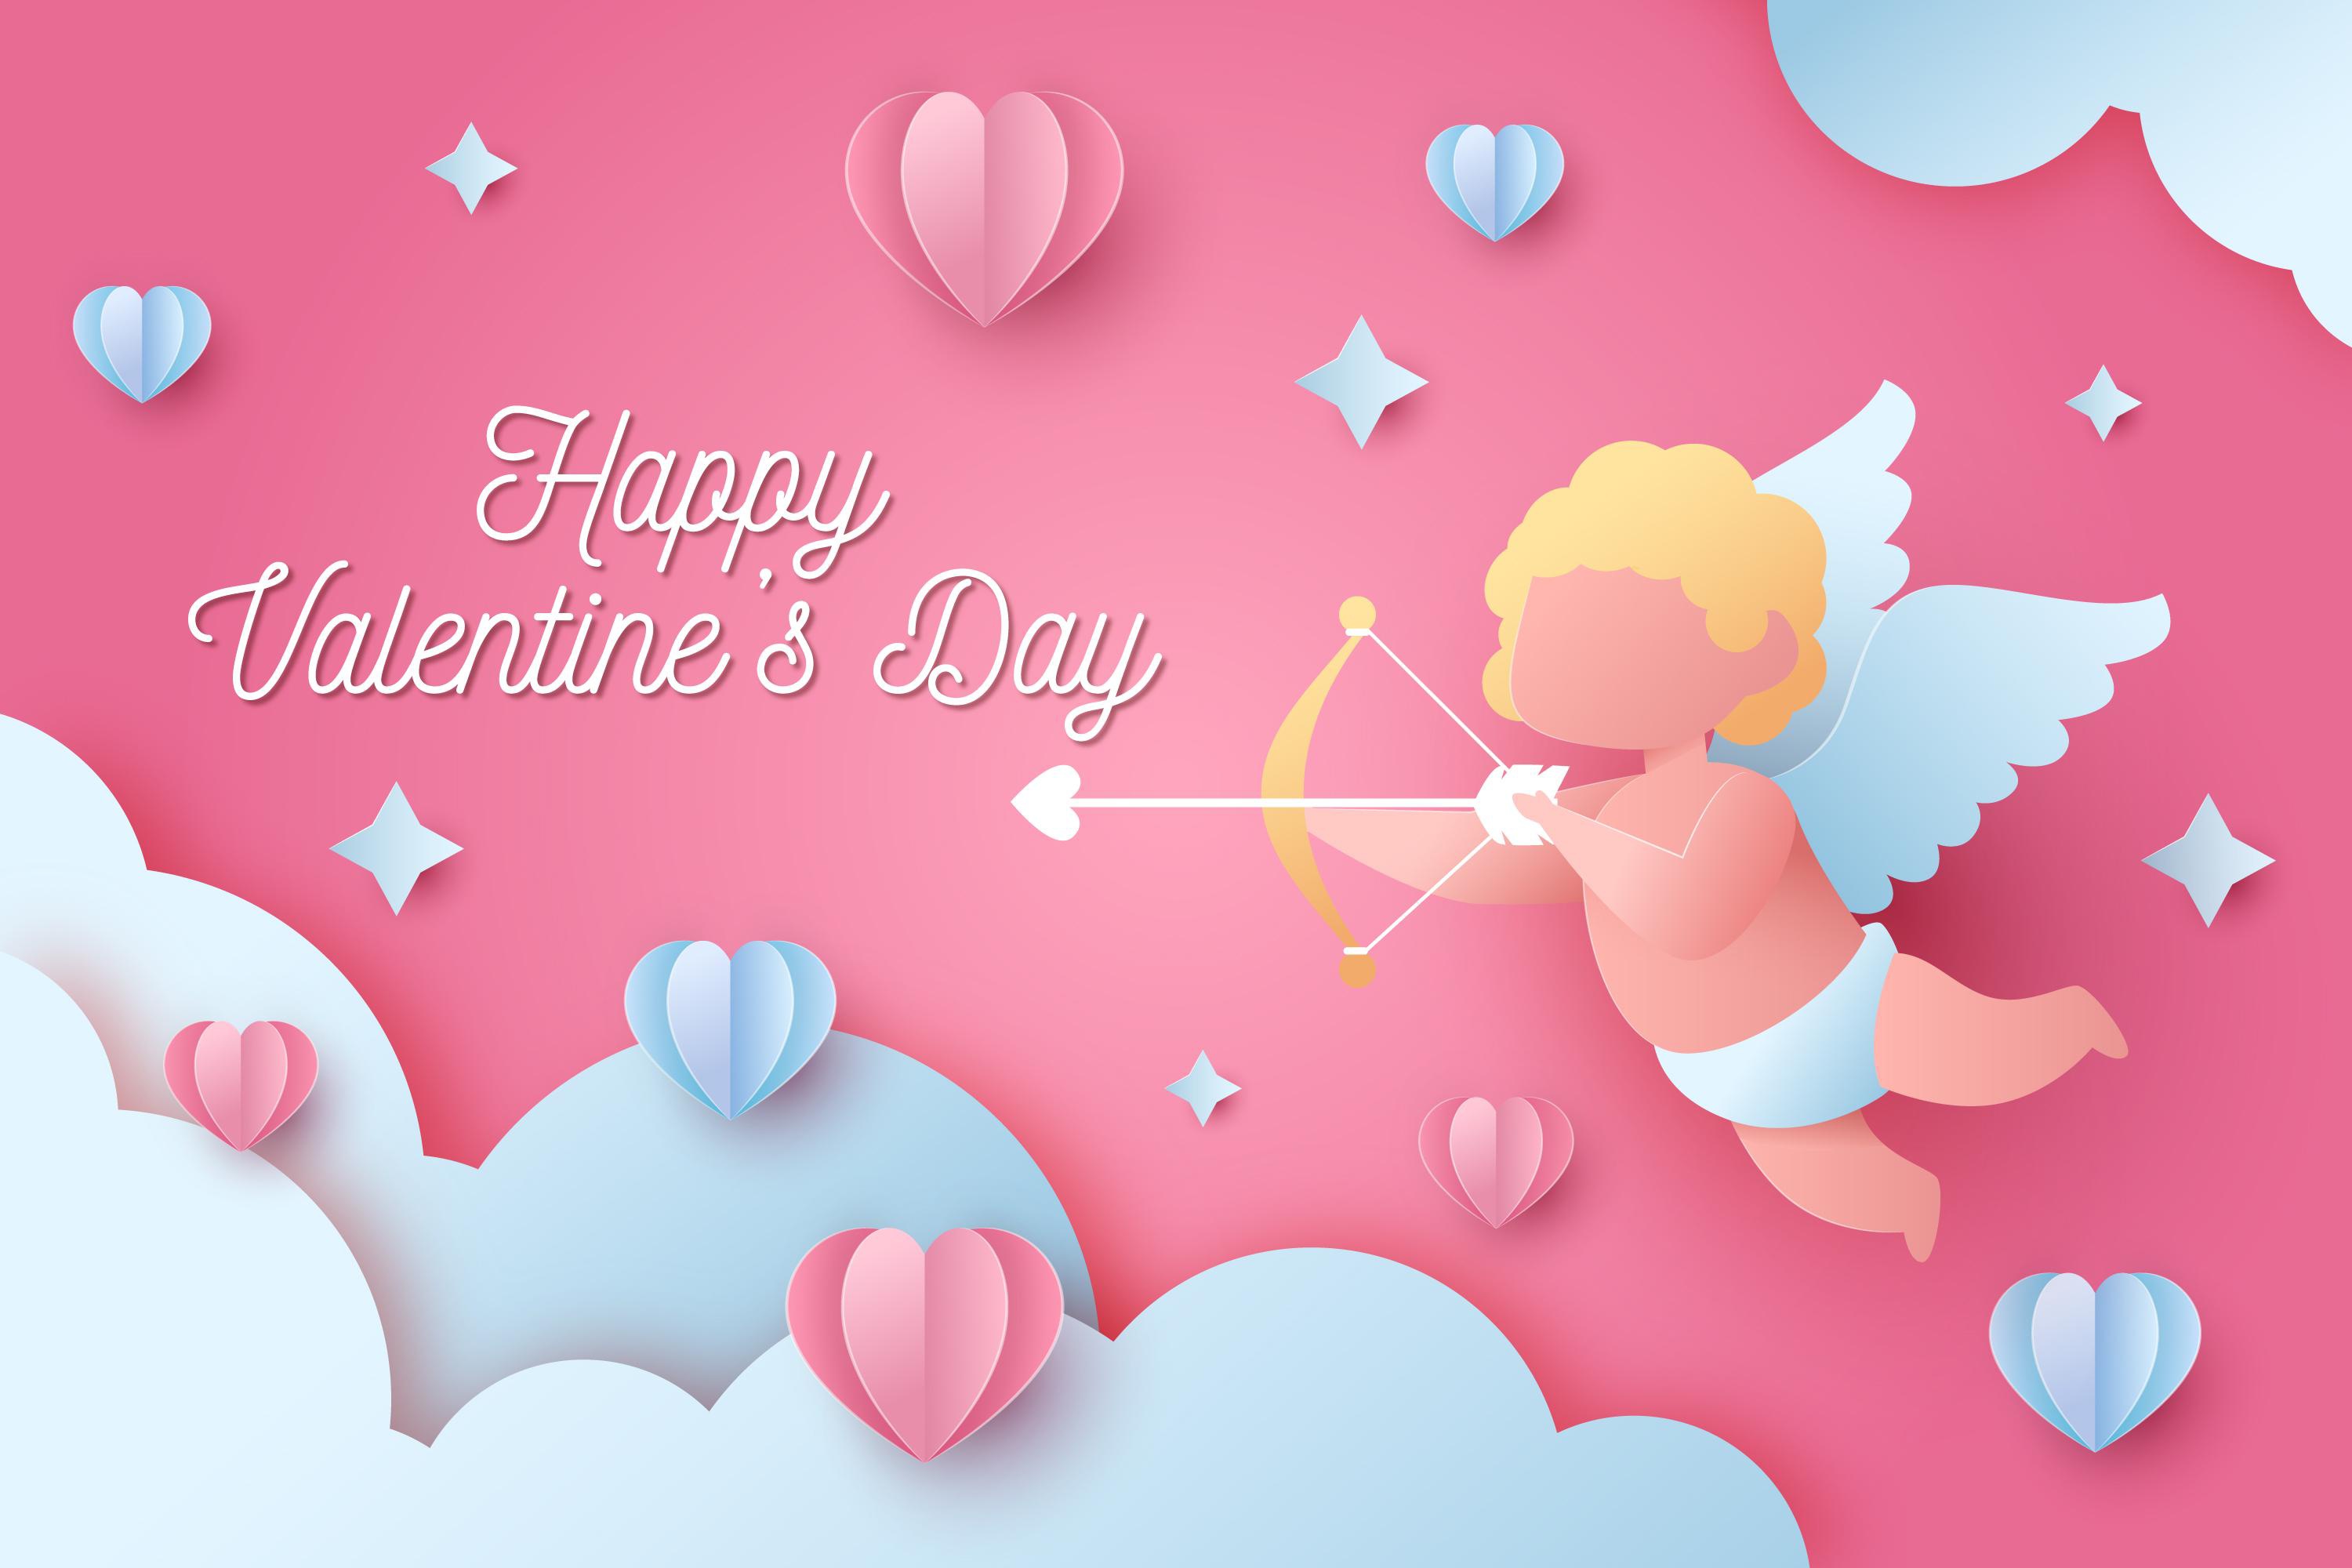 Cupid Images, HD Pictures For Free Vectors Download - Lovepik.com